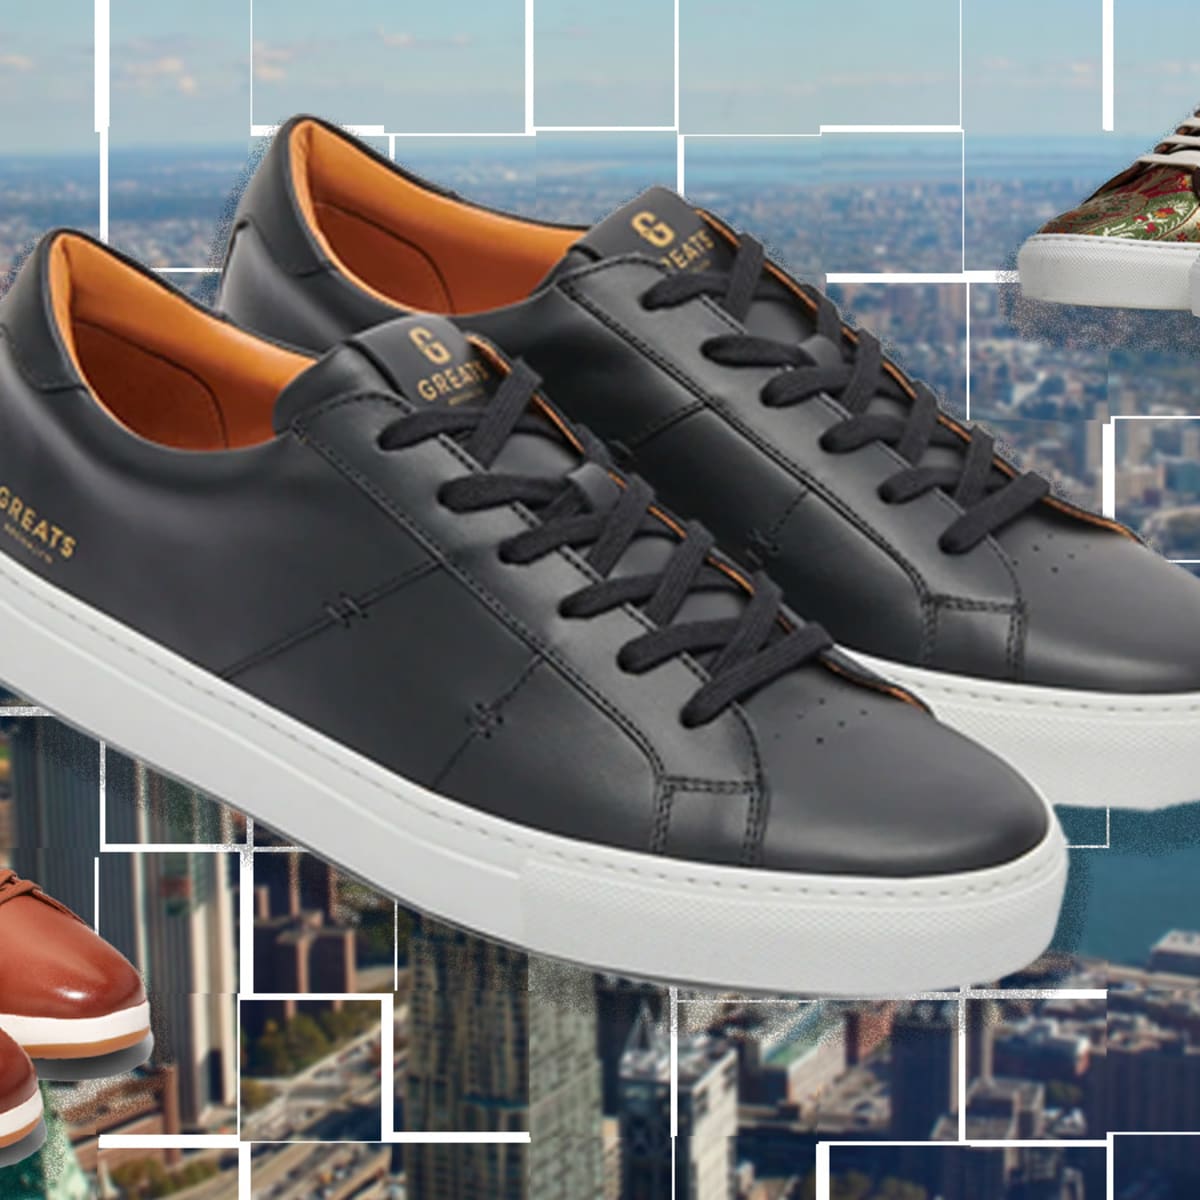 6 Best Designer Sneakers For Men For Casual And Office Wear by Henry Watson  - Issuu